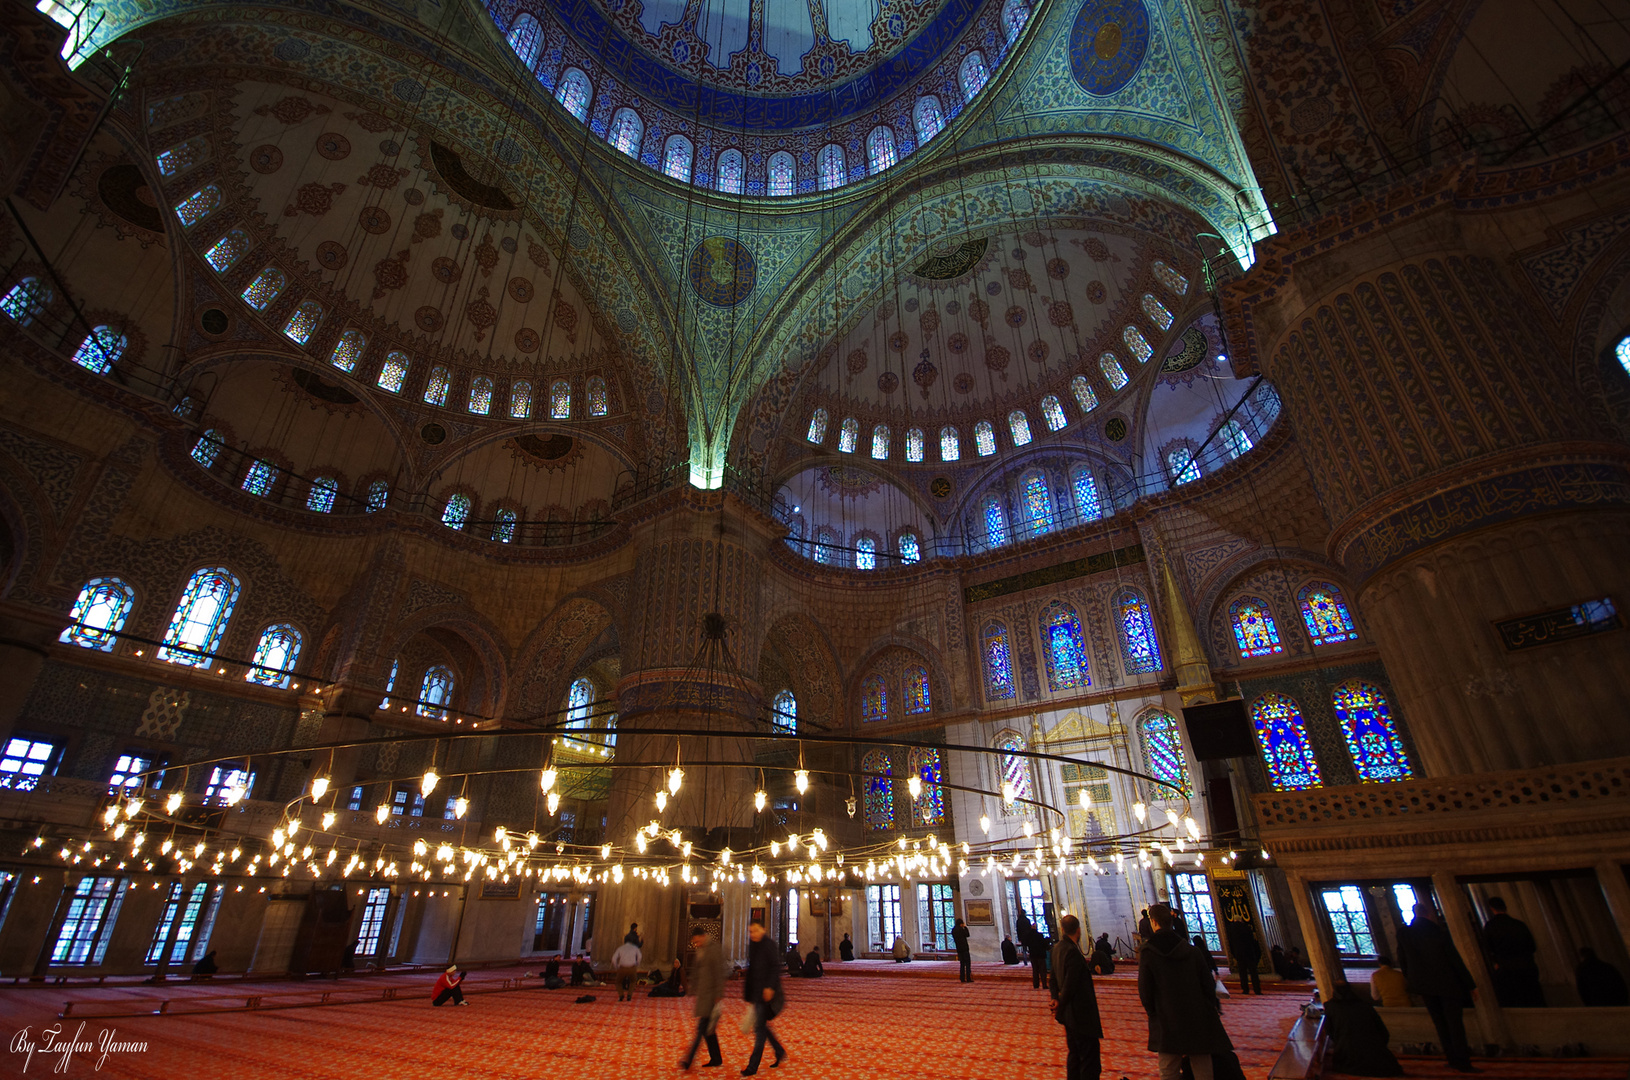 Sultan Ahmed Mosque (aka Blue Mosque)